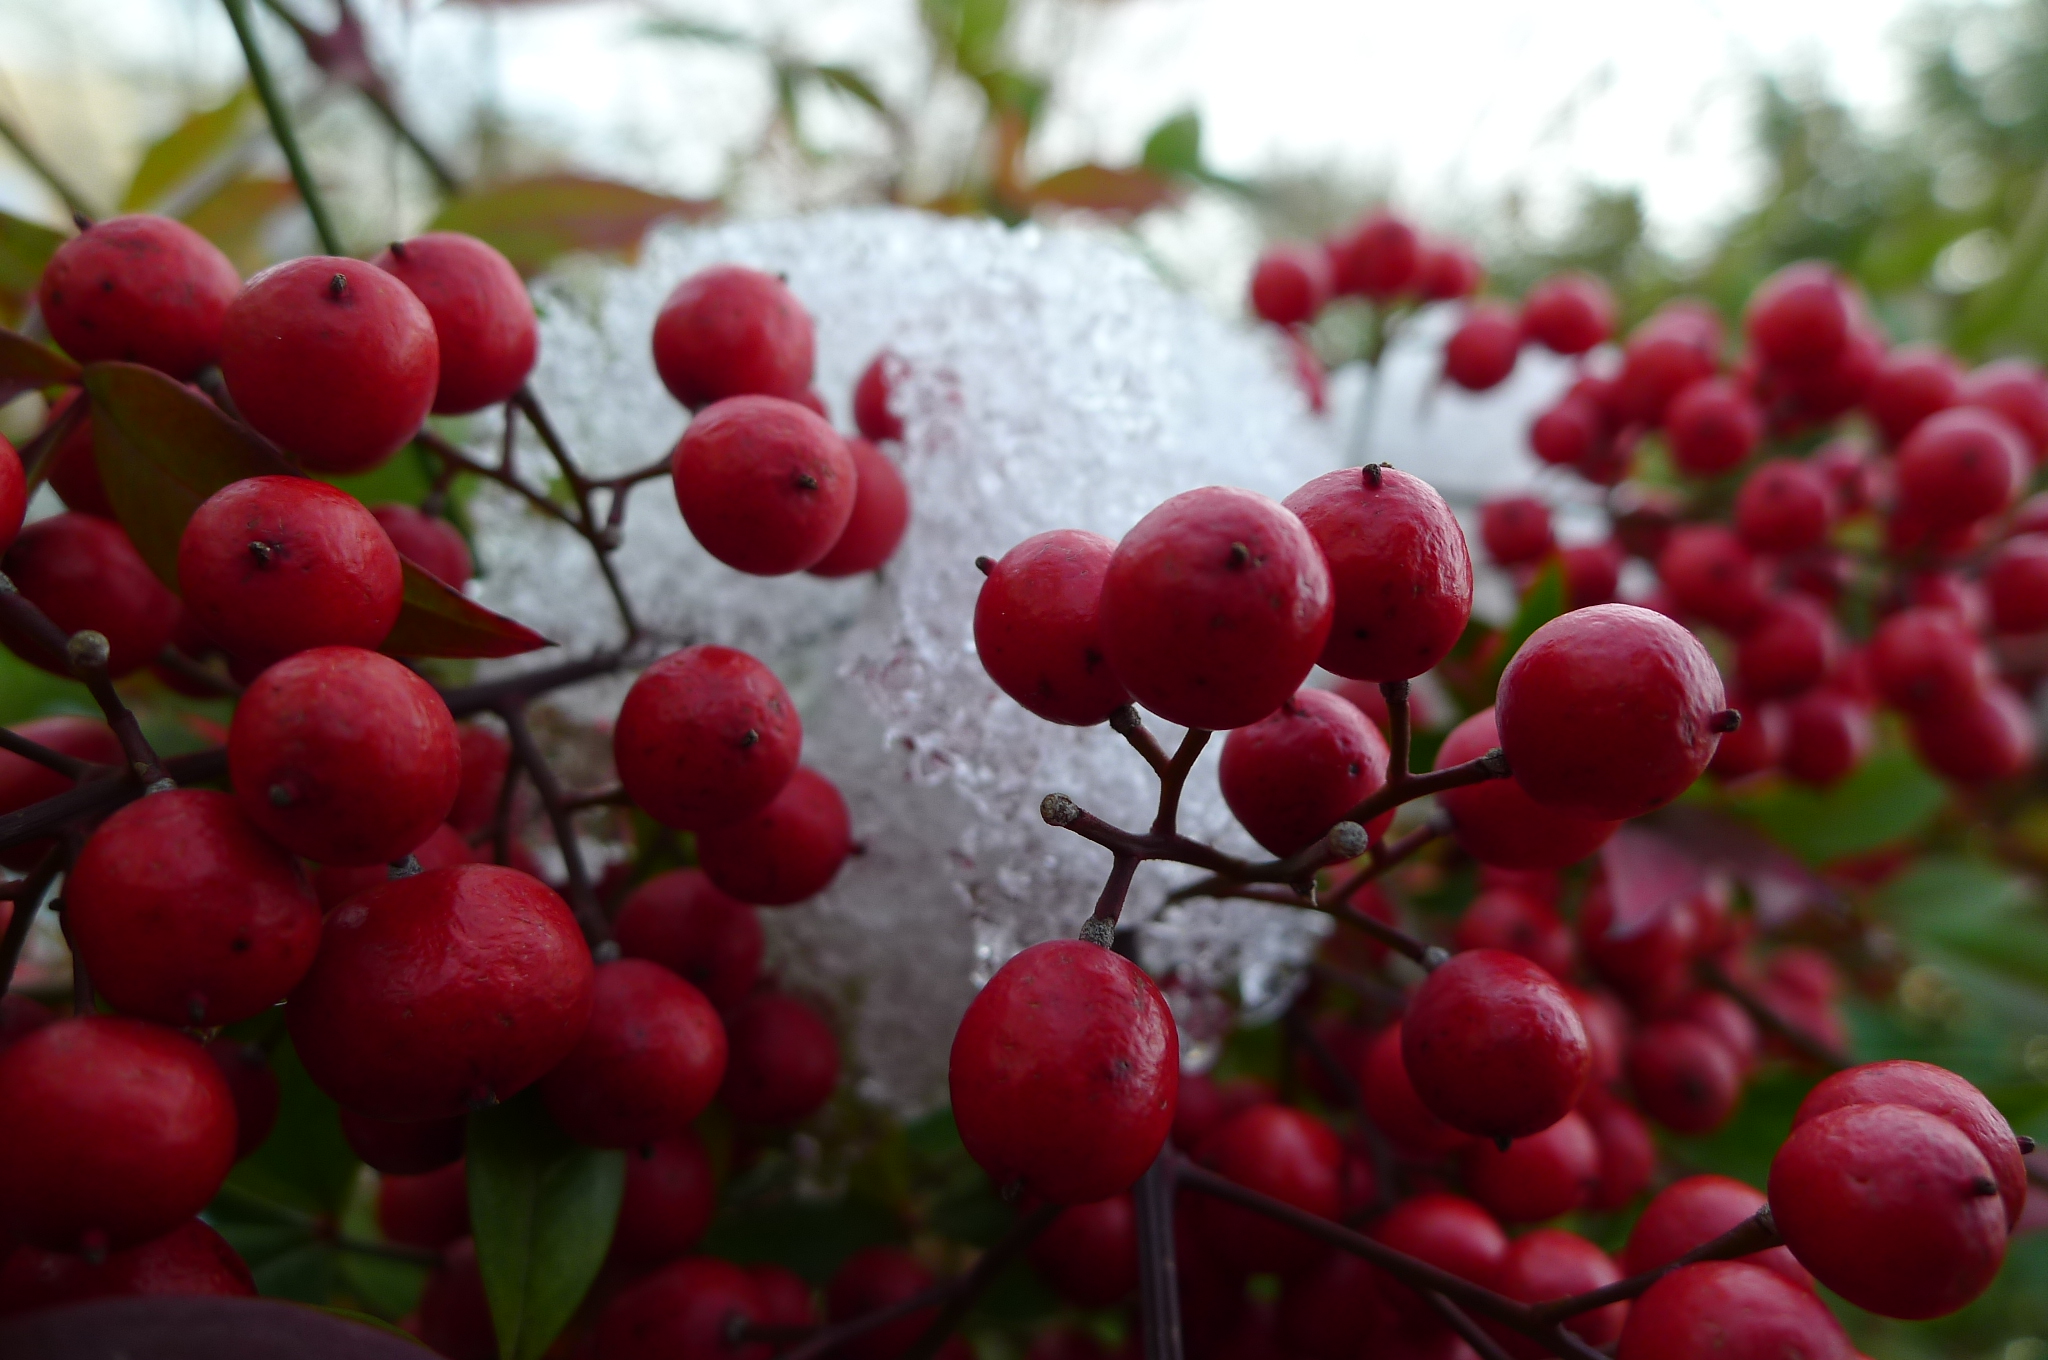 Berries and snow